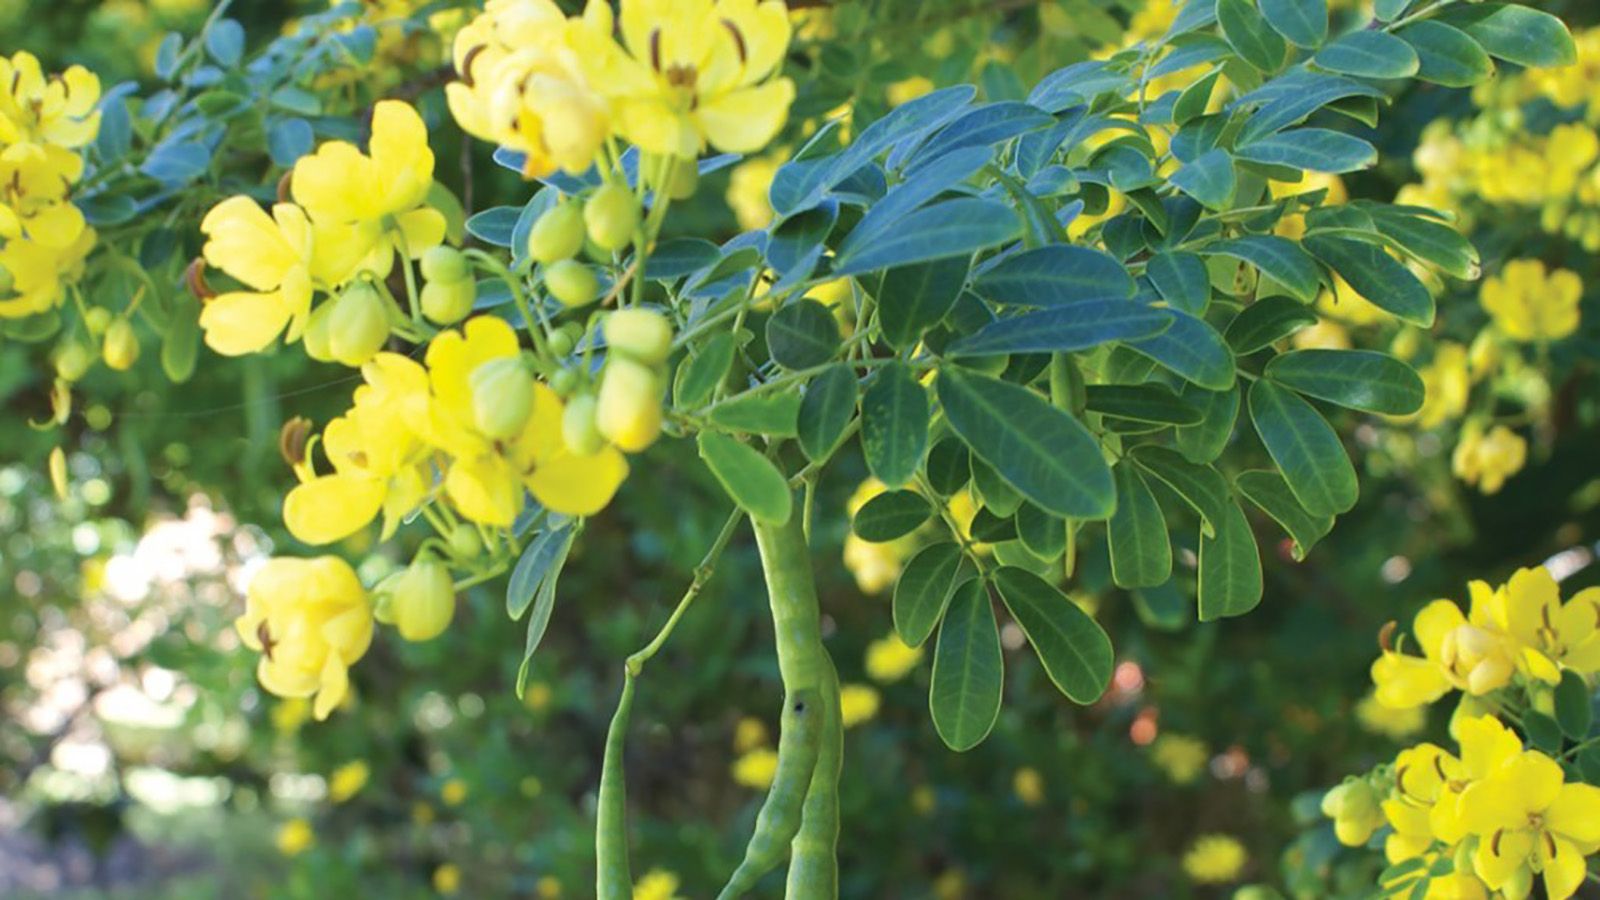 Close up of yellow flower buds on a green plant banner image